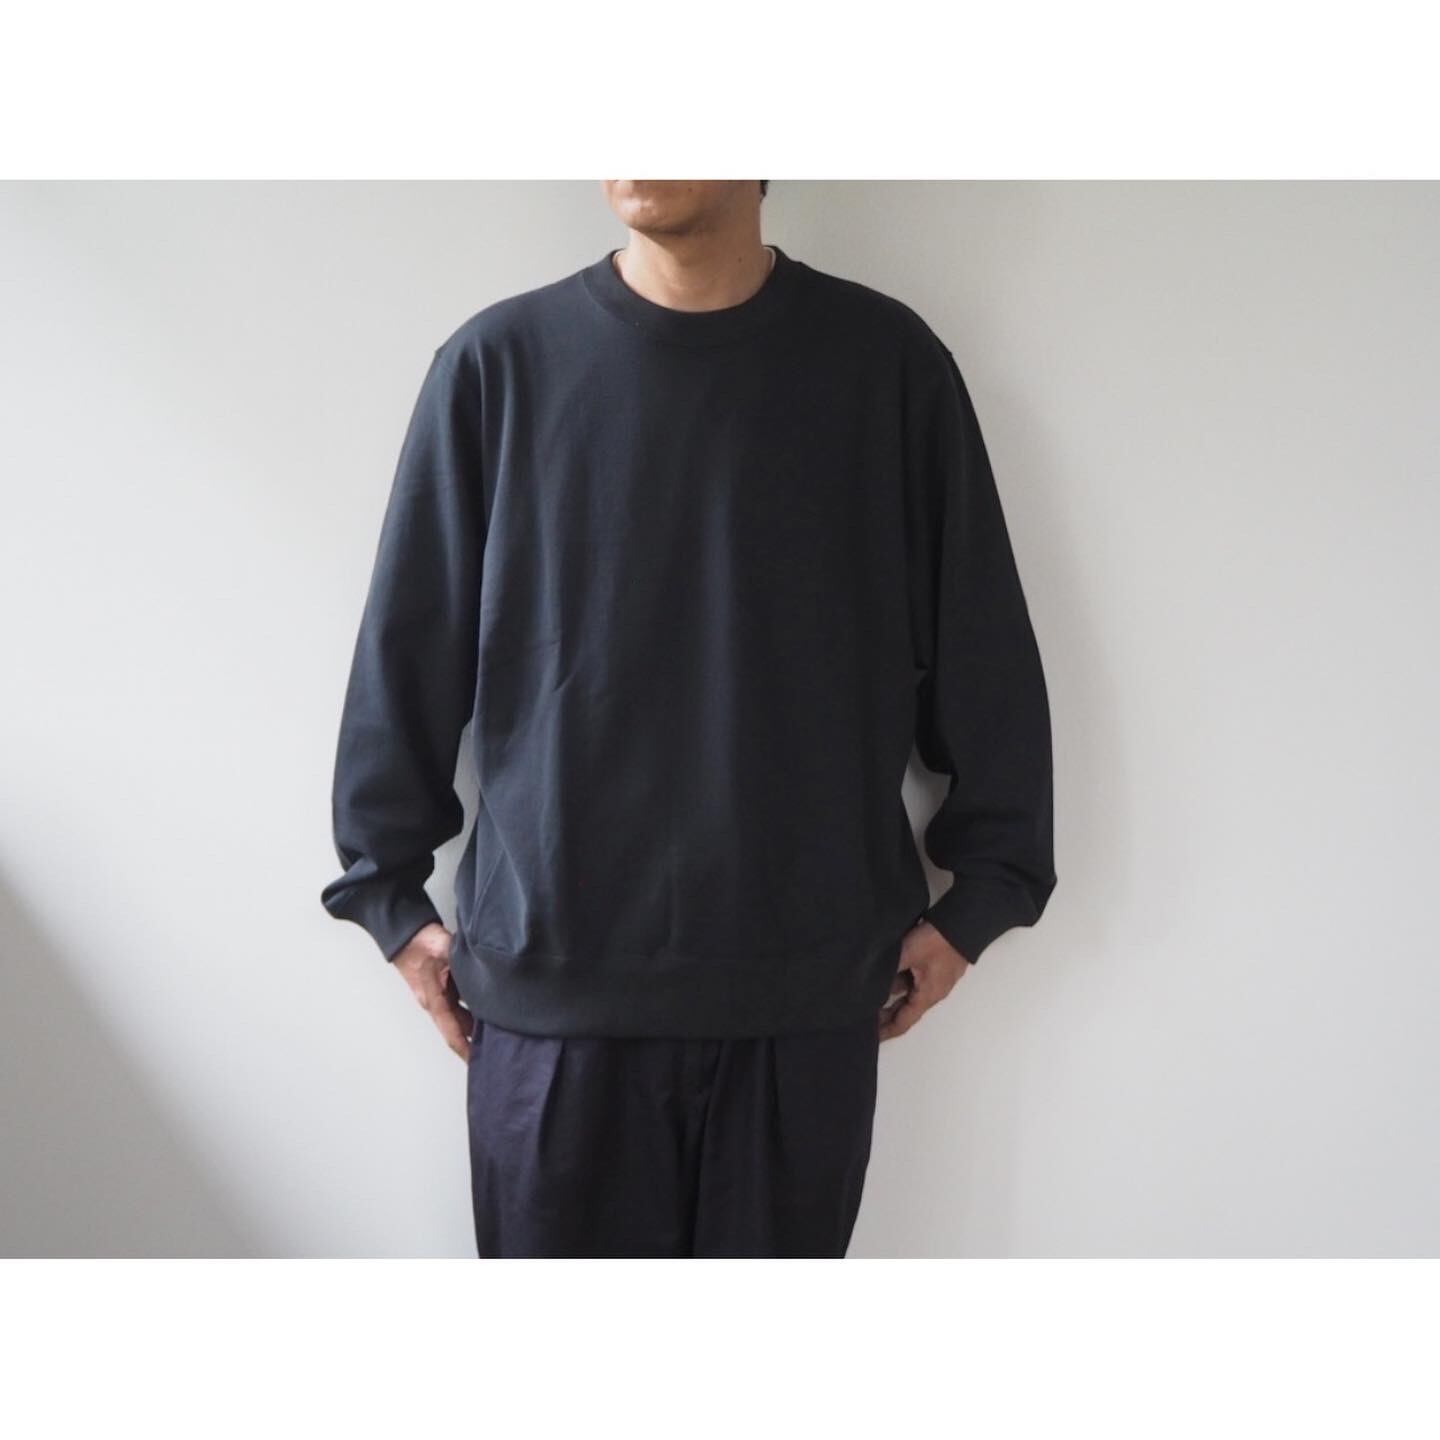 STILL BY HAND(スティル バイ ハンド) French Terry Pivot Sleeve Crew Neck Sweat |  AUTHENTIC Life Store powered by BASE